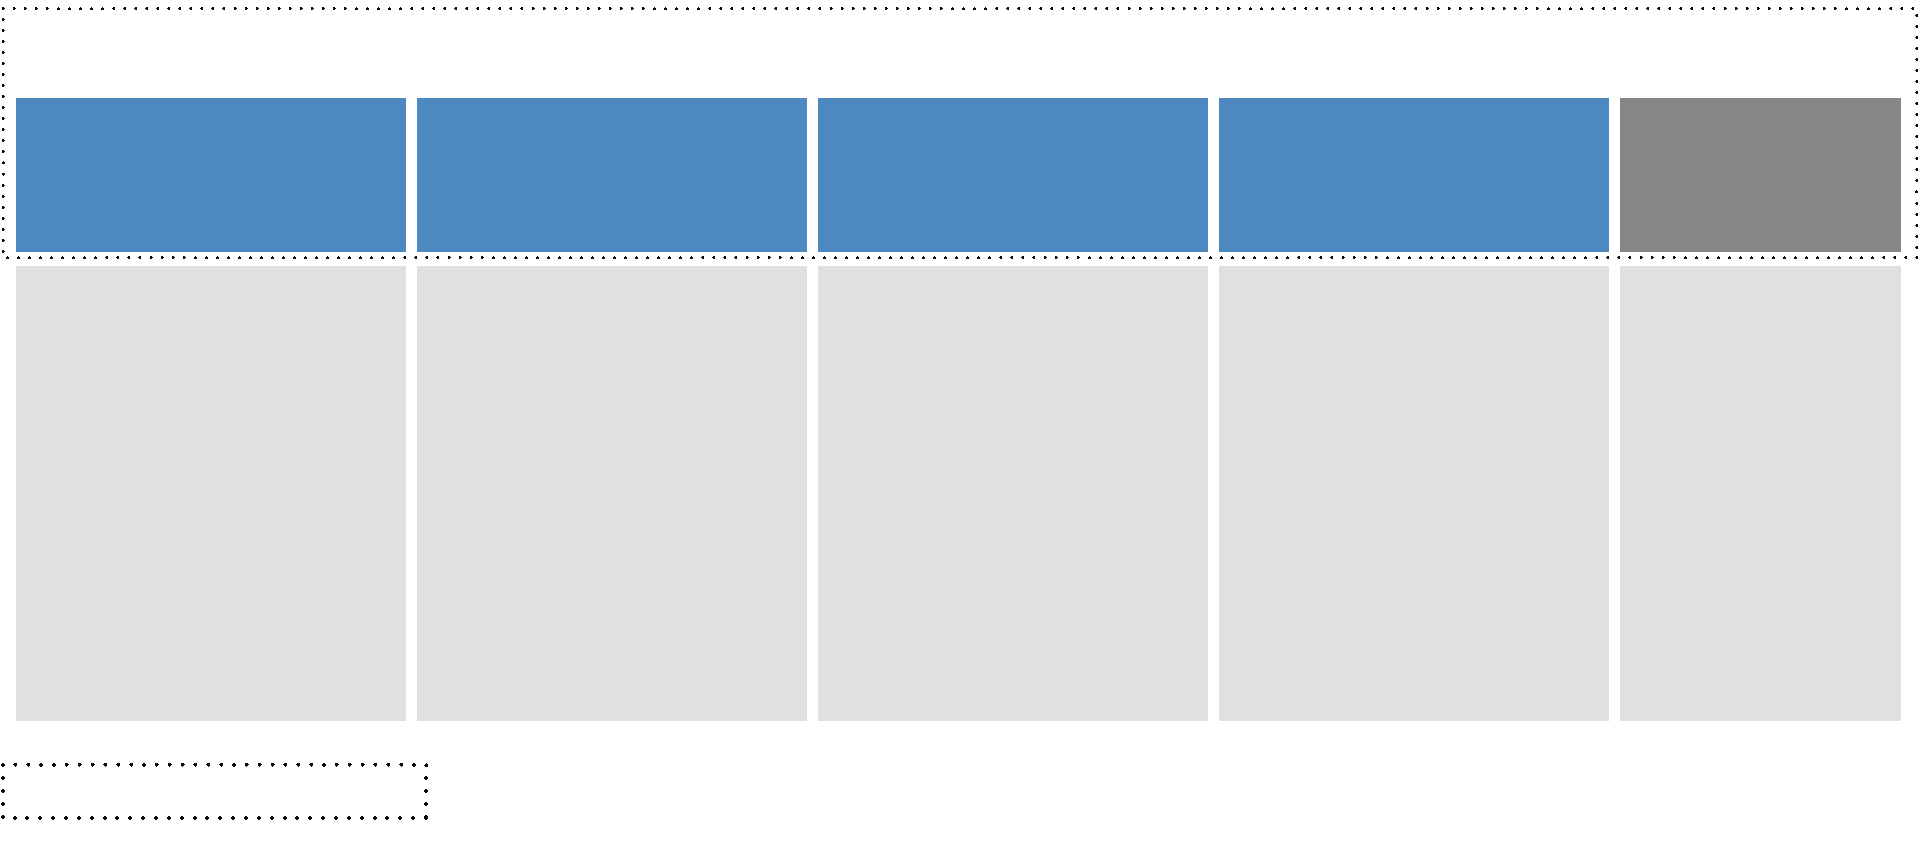 This visual shows Philips’ segment structure